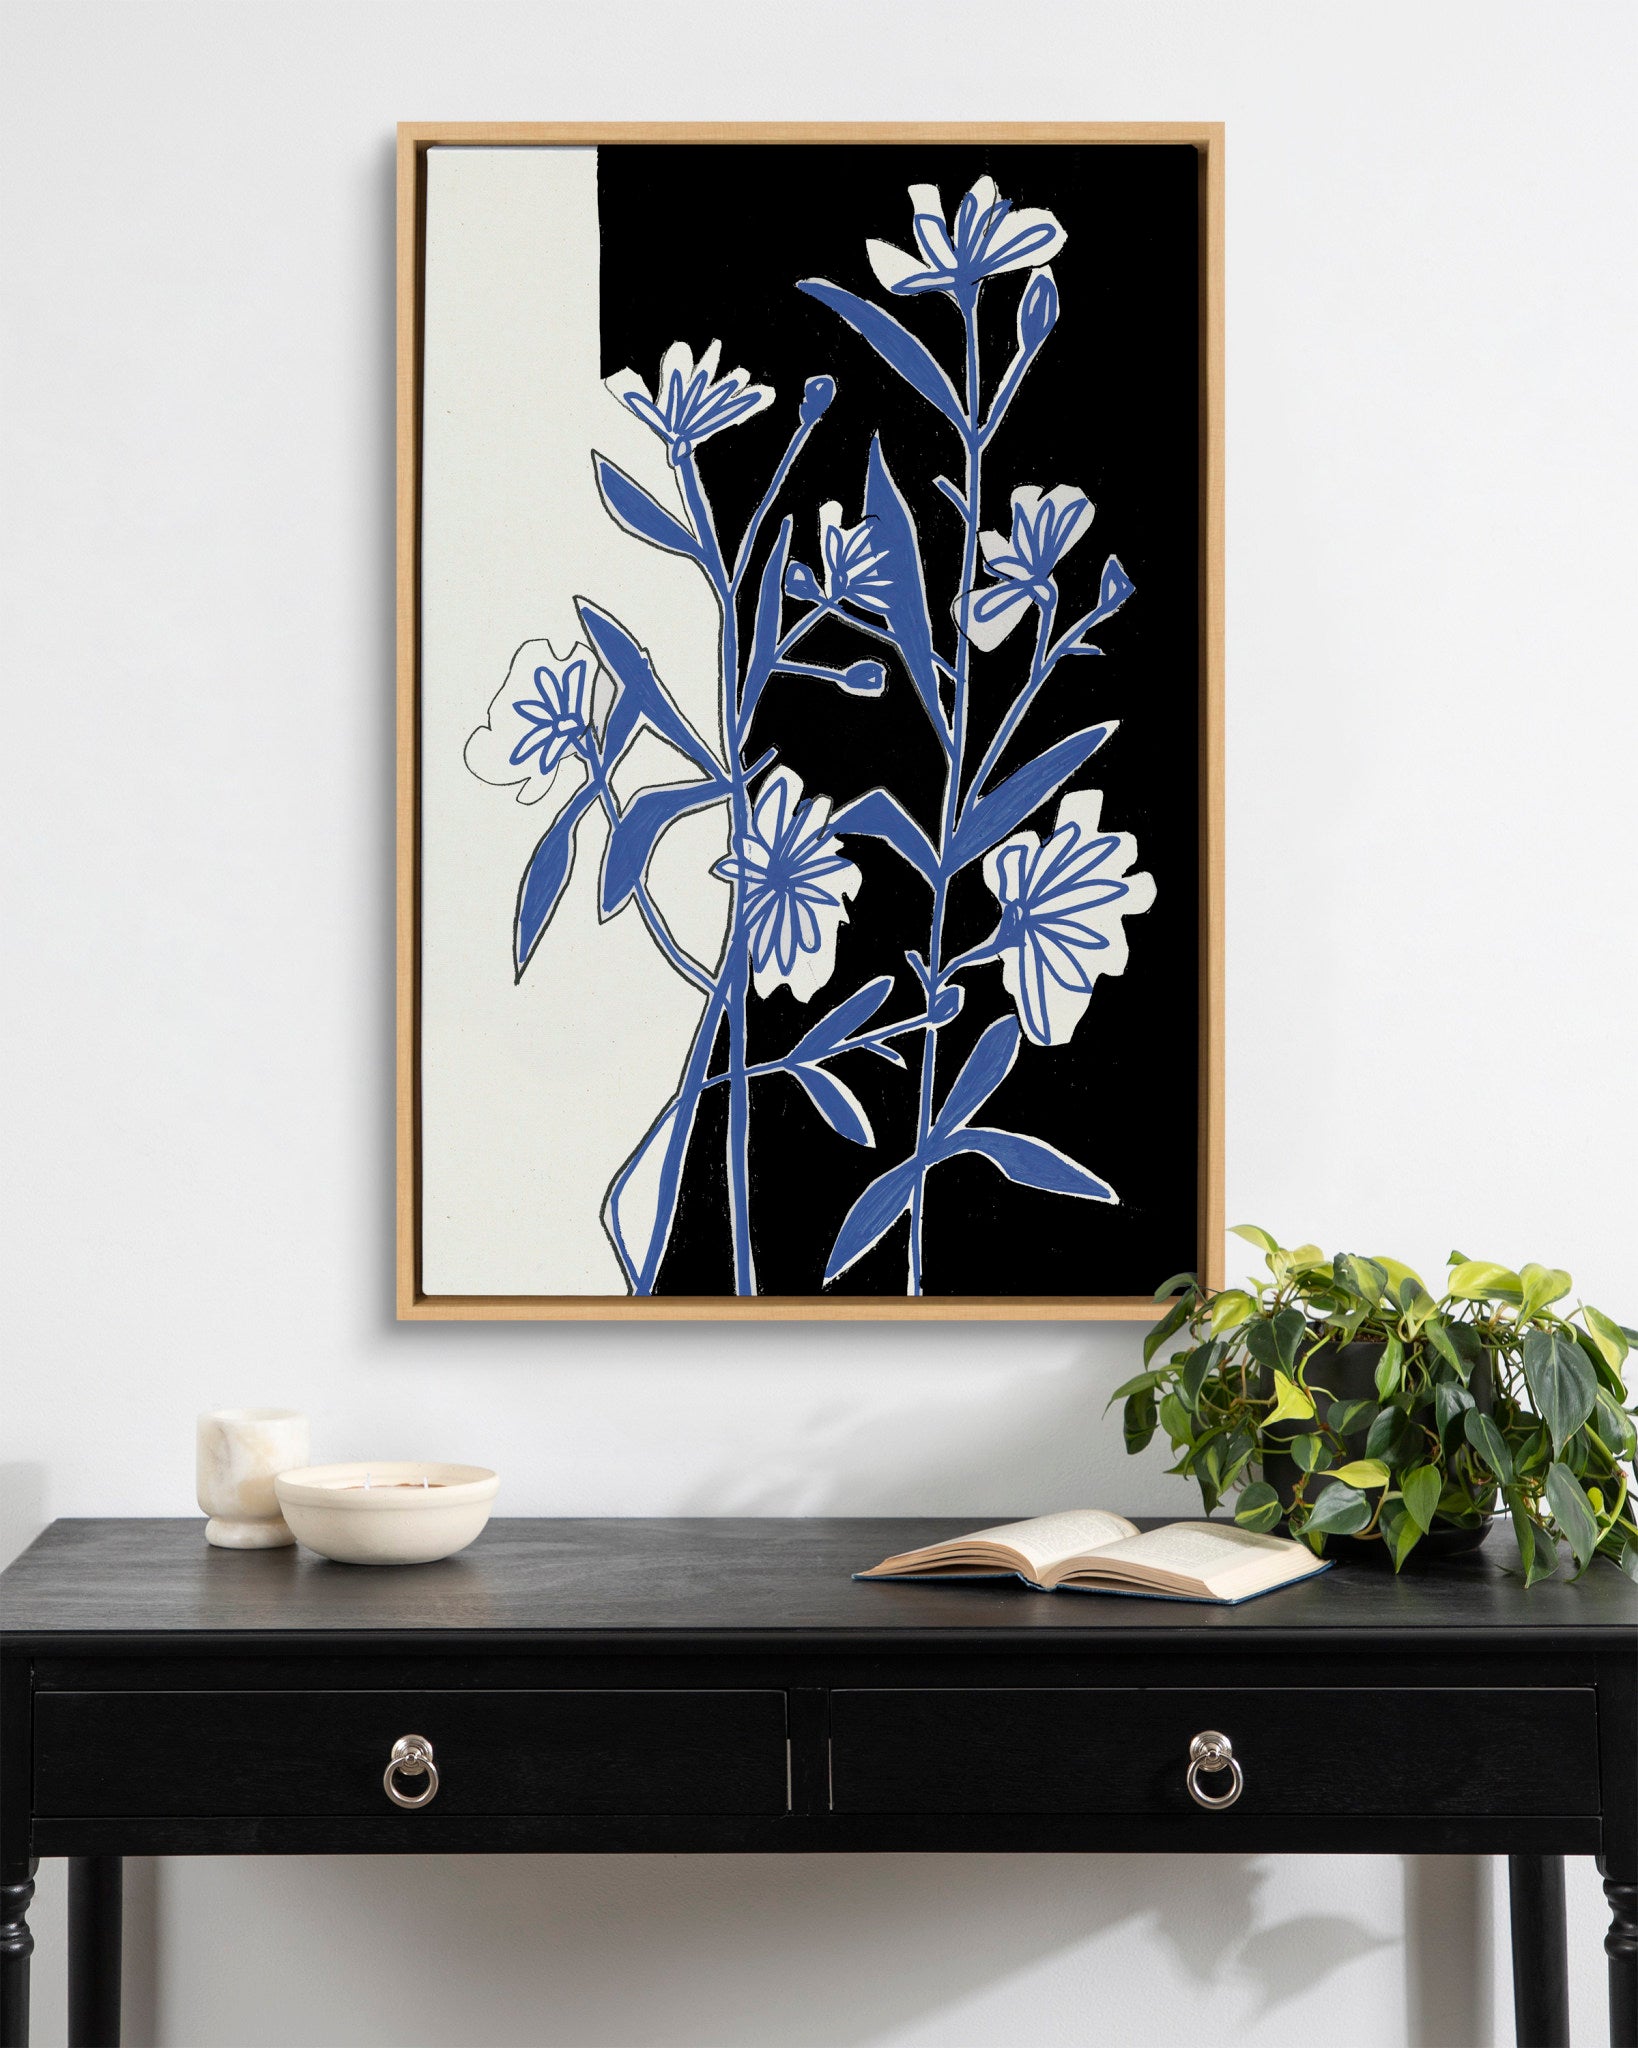 Sylvie 679 Black White and Blue Floral Framed Canvas by Teju Reval of SnazzyHues